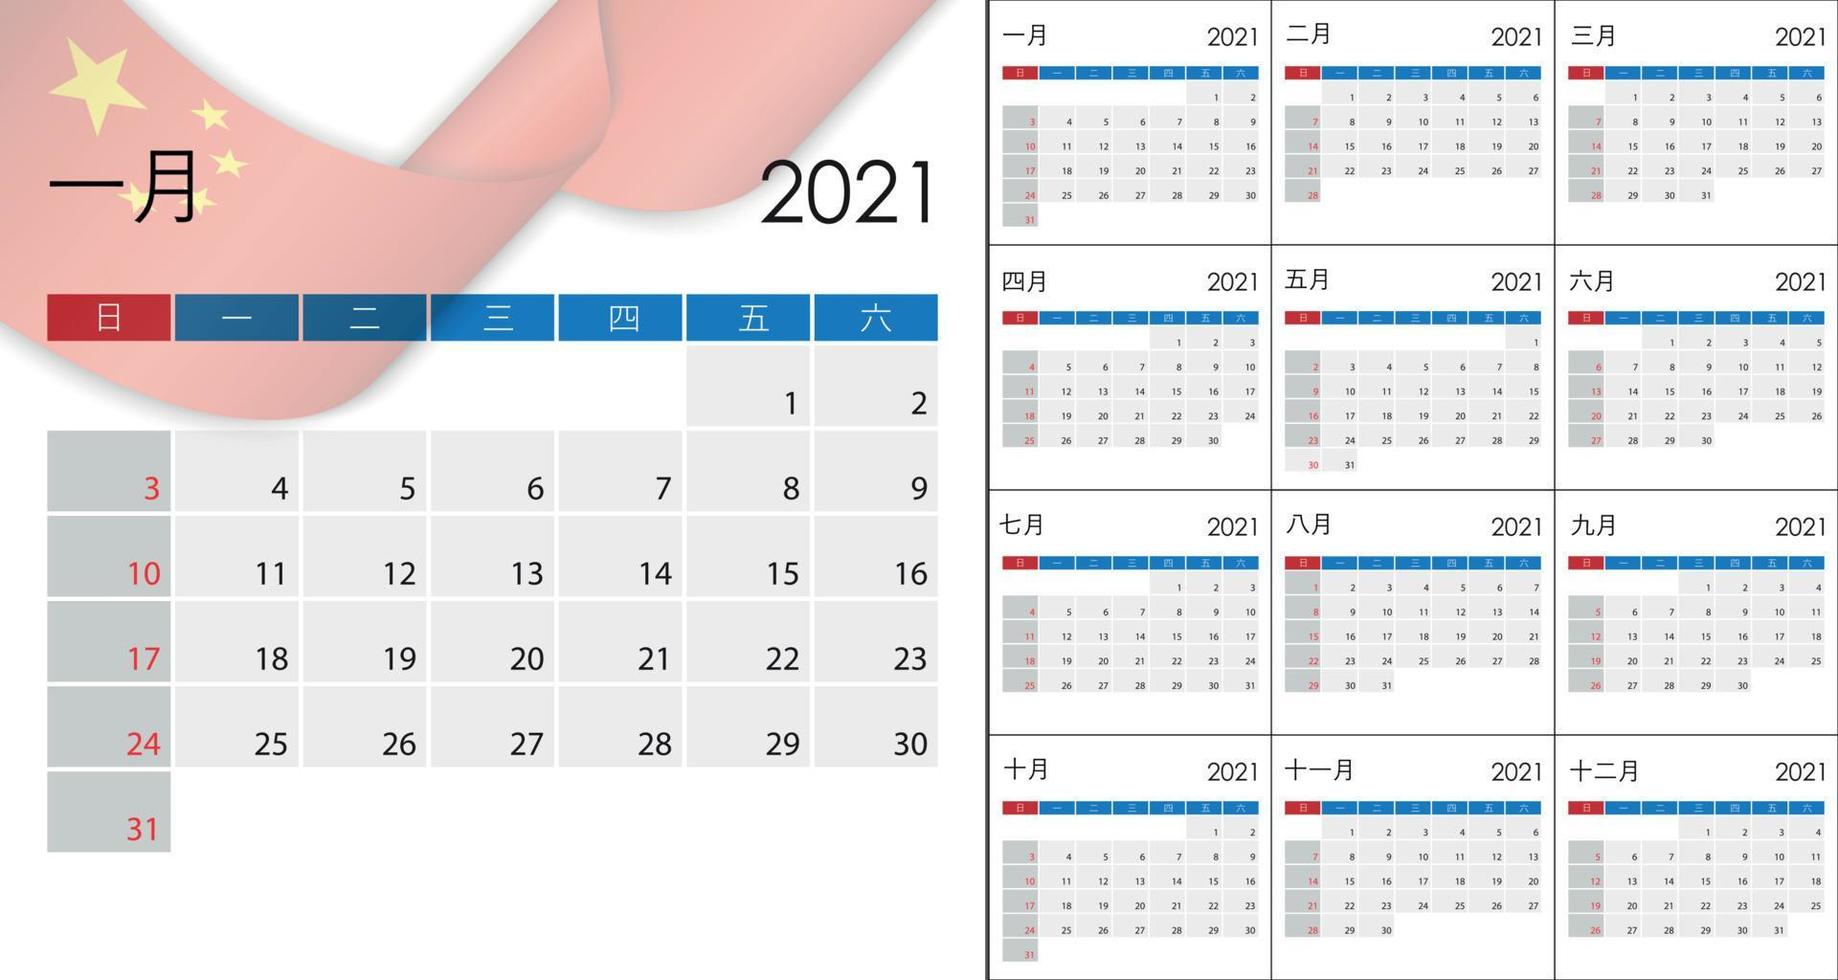 Simple Calendar 2021 on Chinese language, week start on Sunday. for your design vector